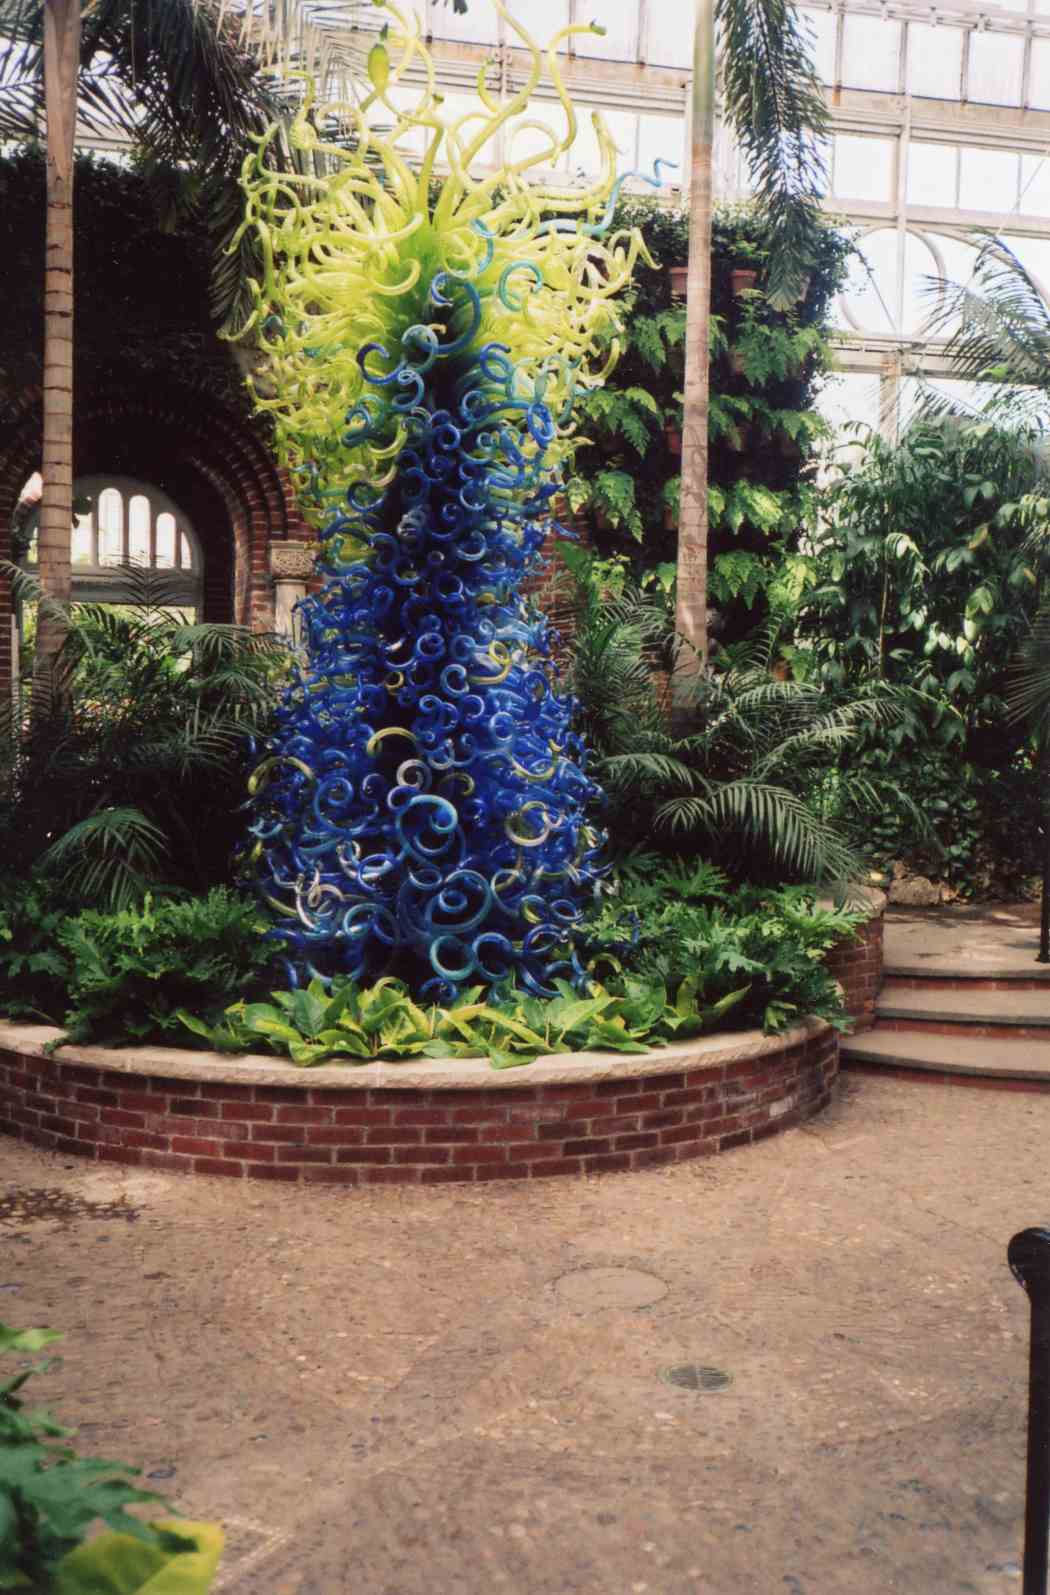 Chihuly at Phipps: Gardens and Glass